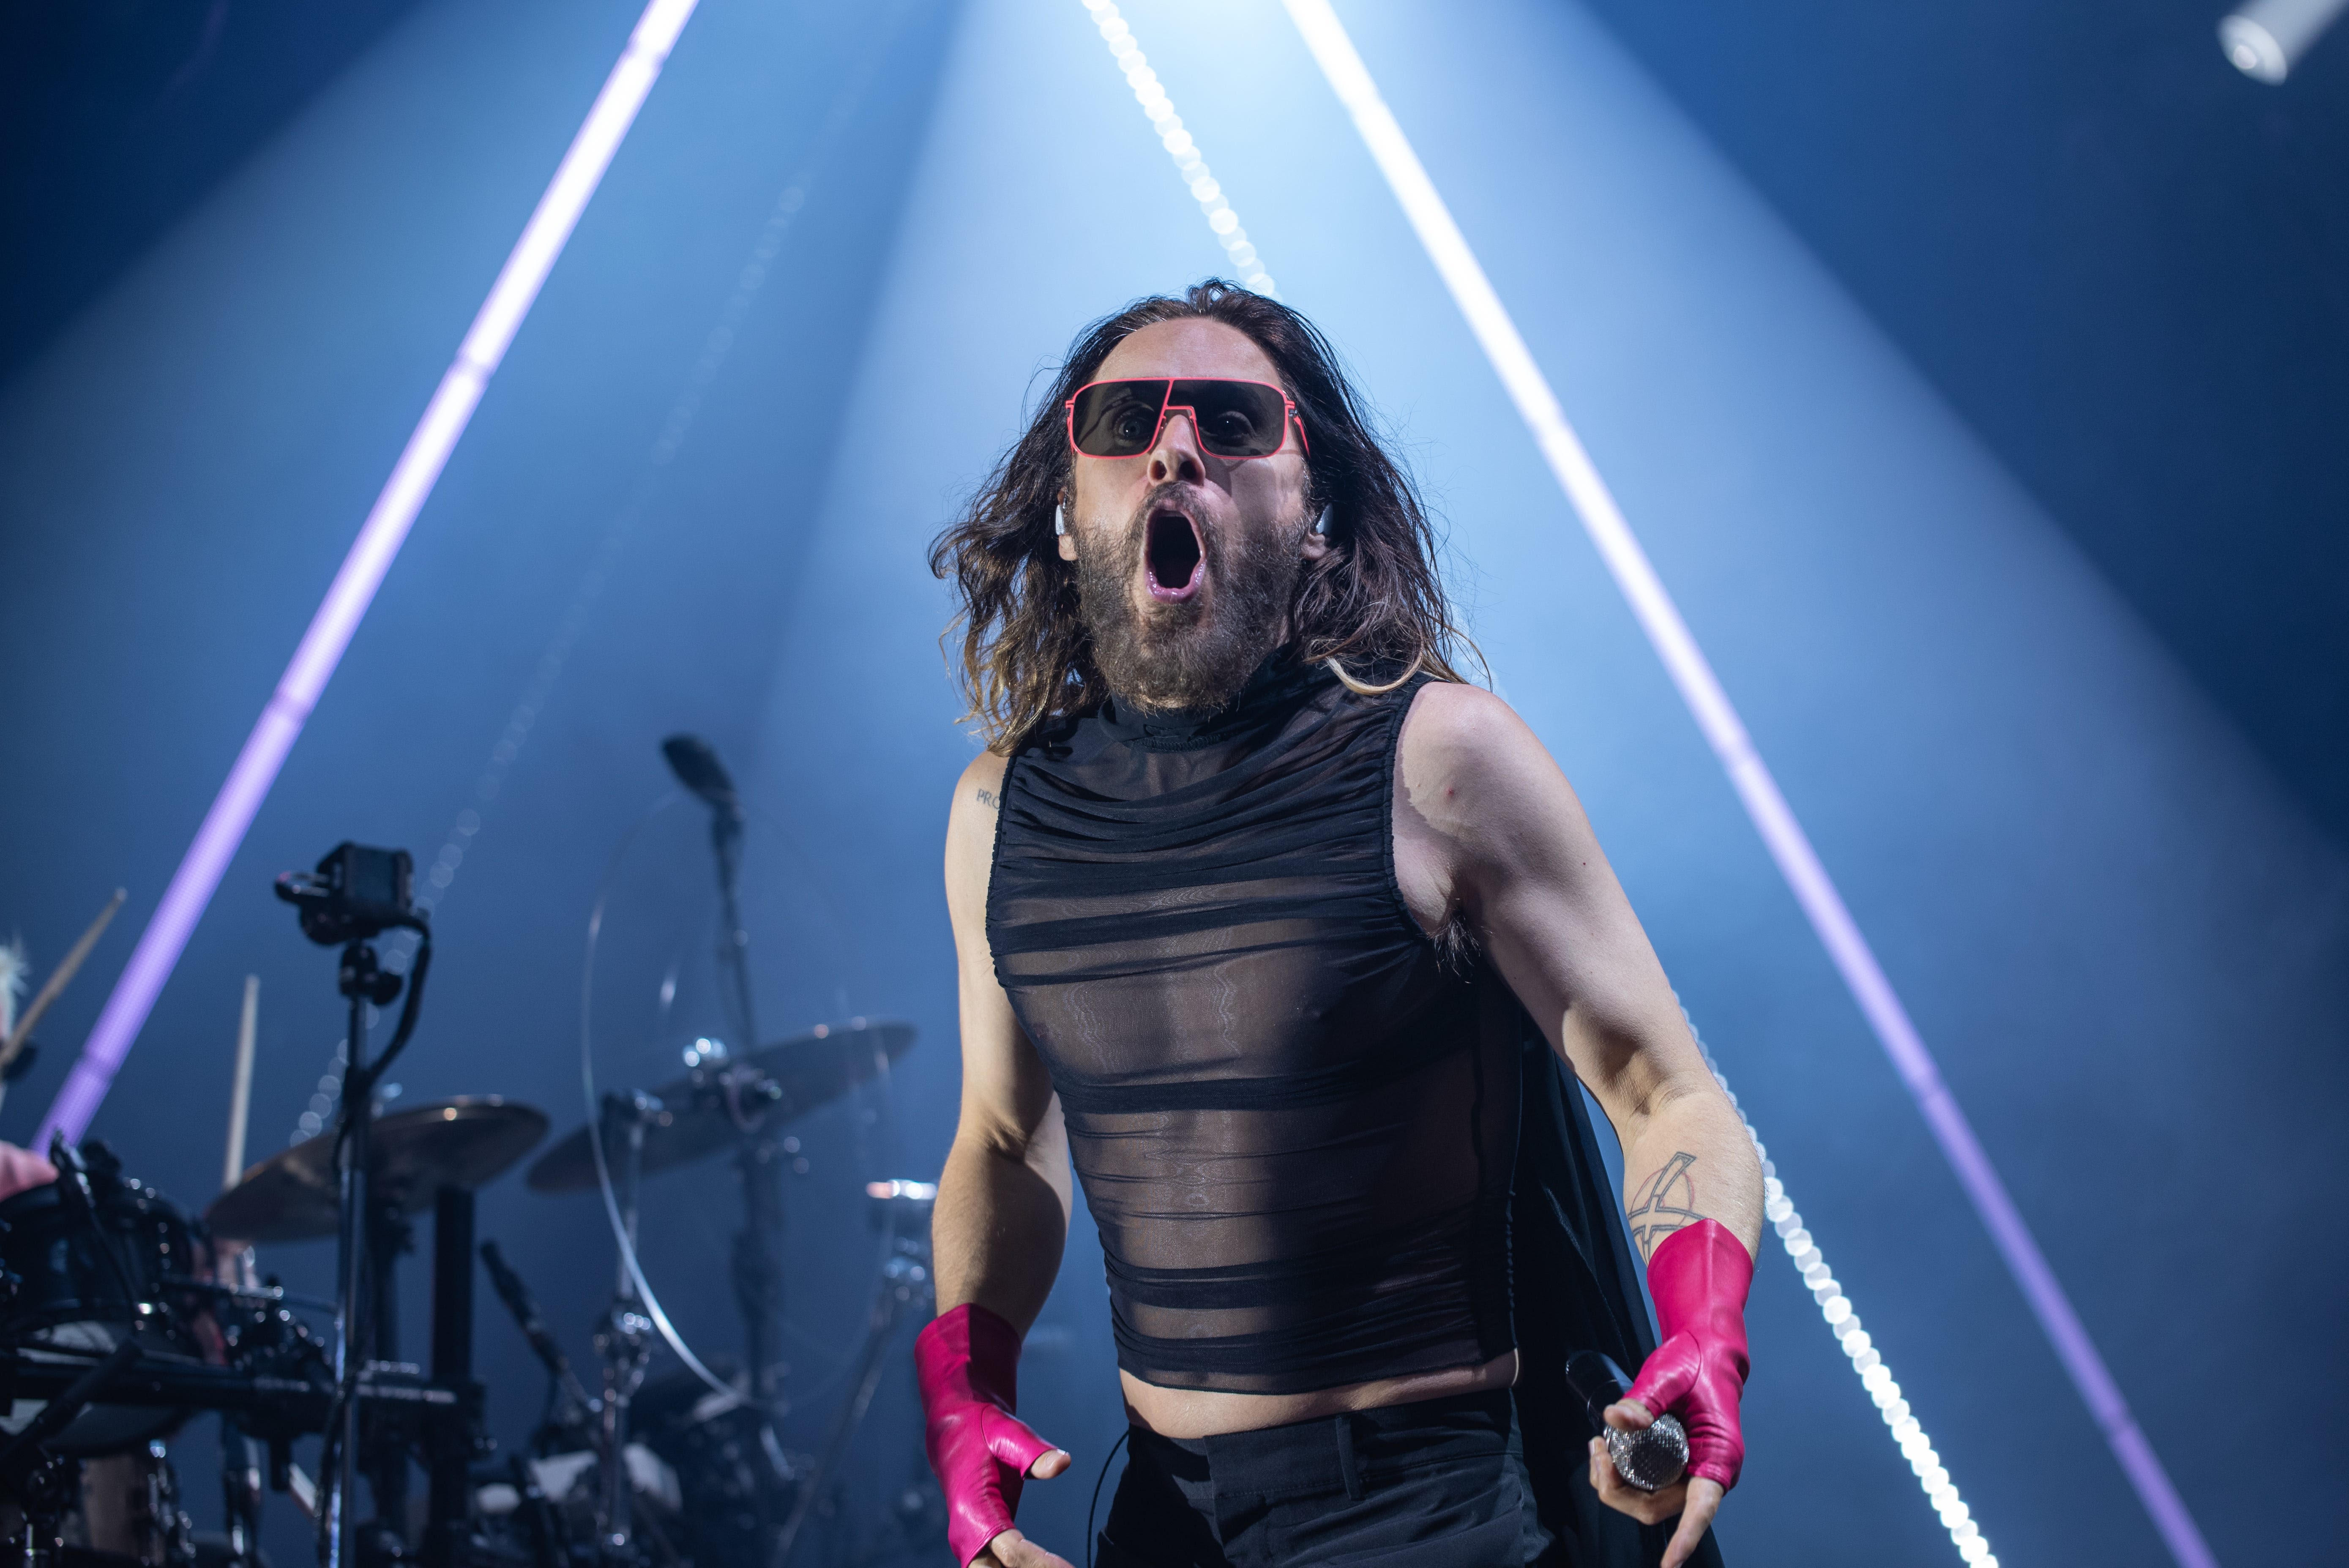 Jared Leto's Thirty Seconds to Mars kicks off tour in Milwaukee opposite GOP convention